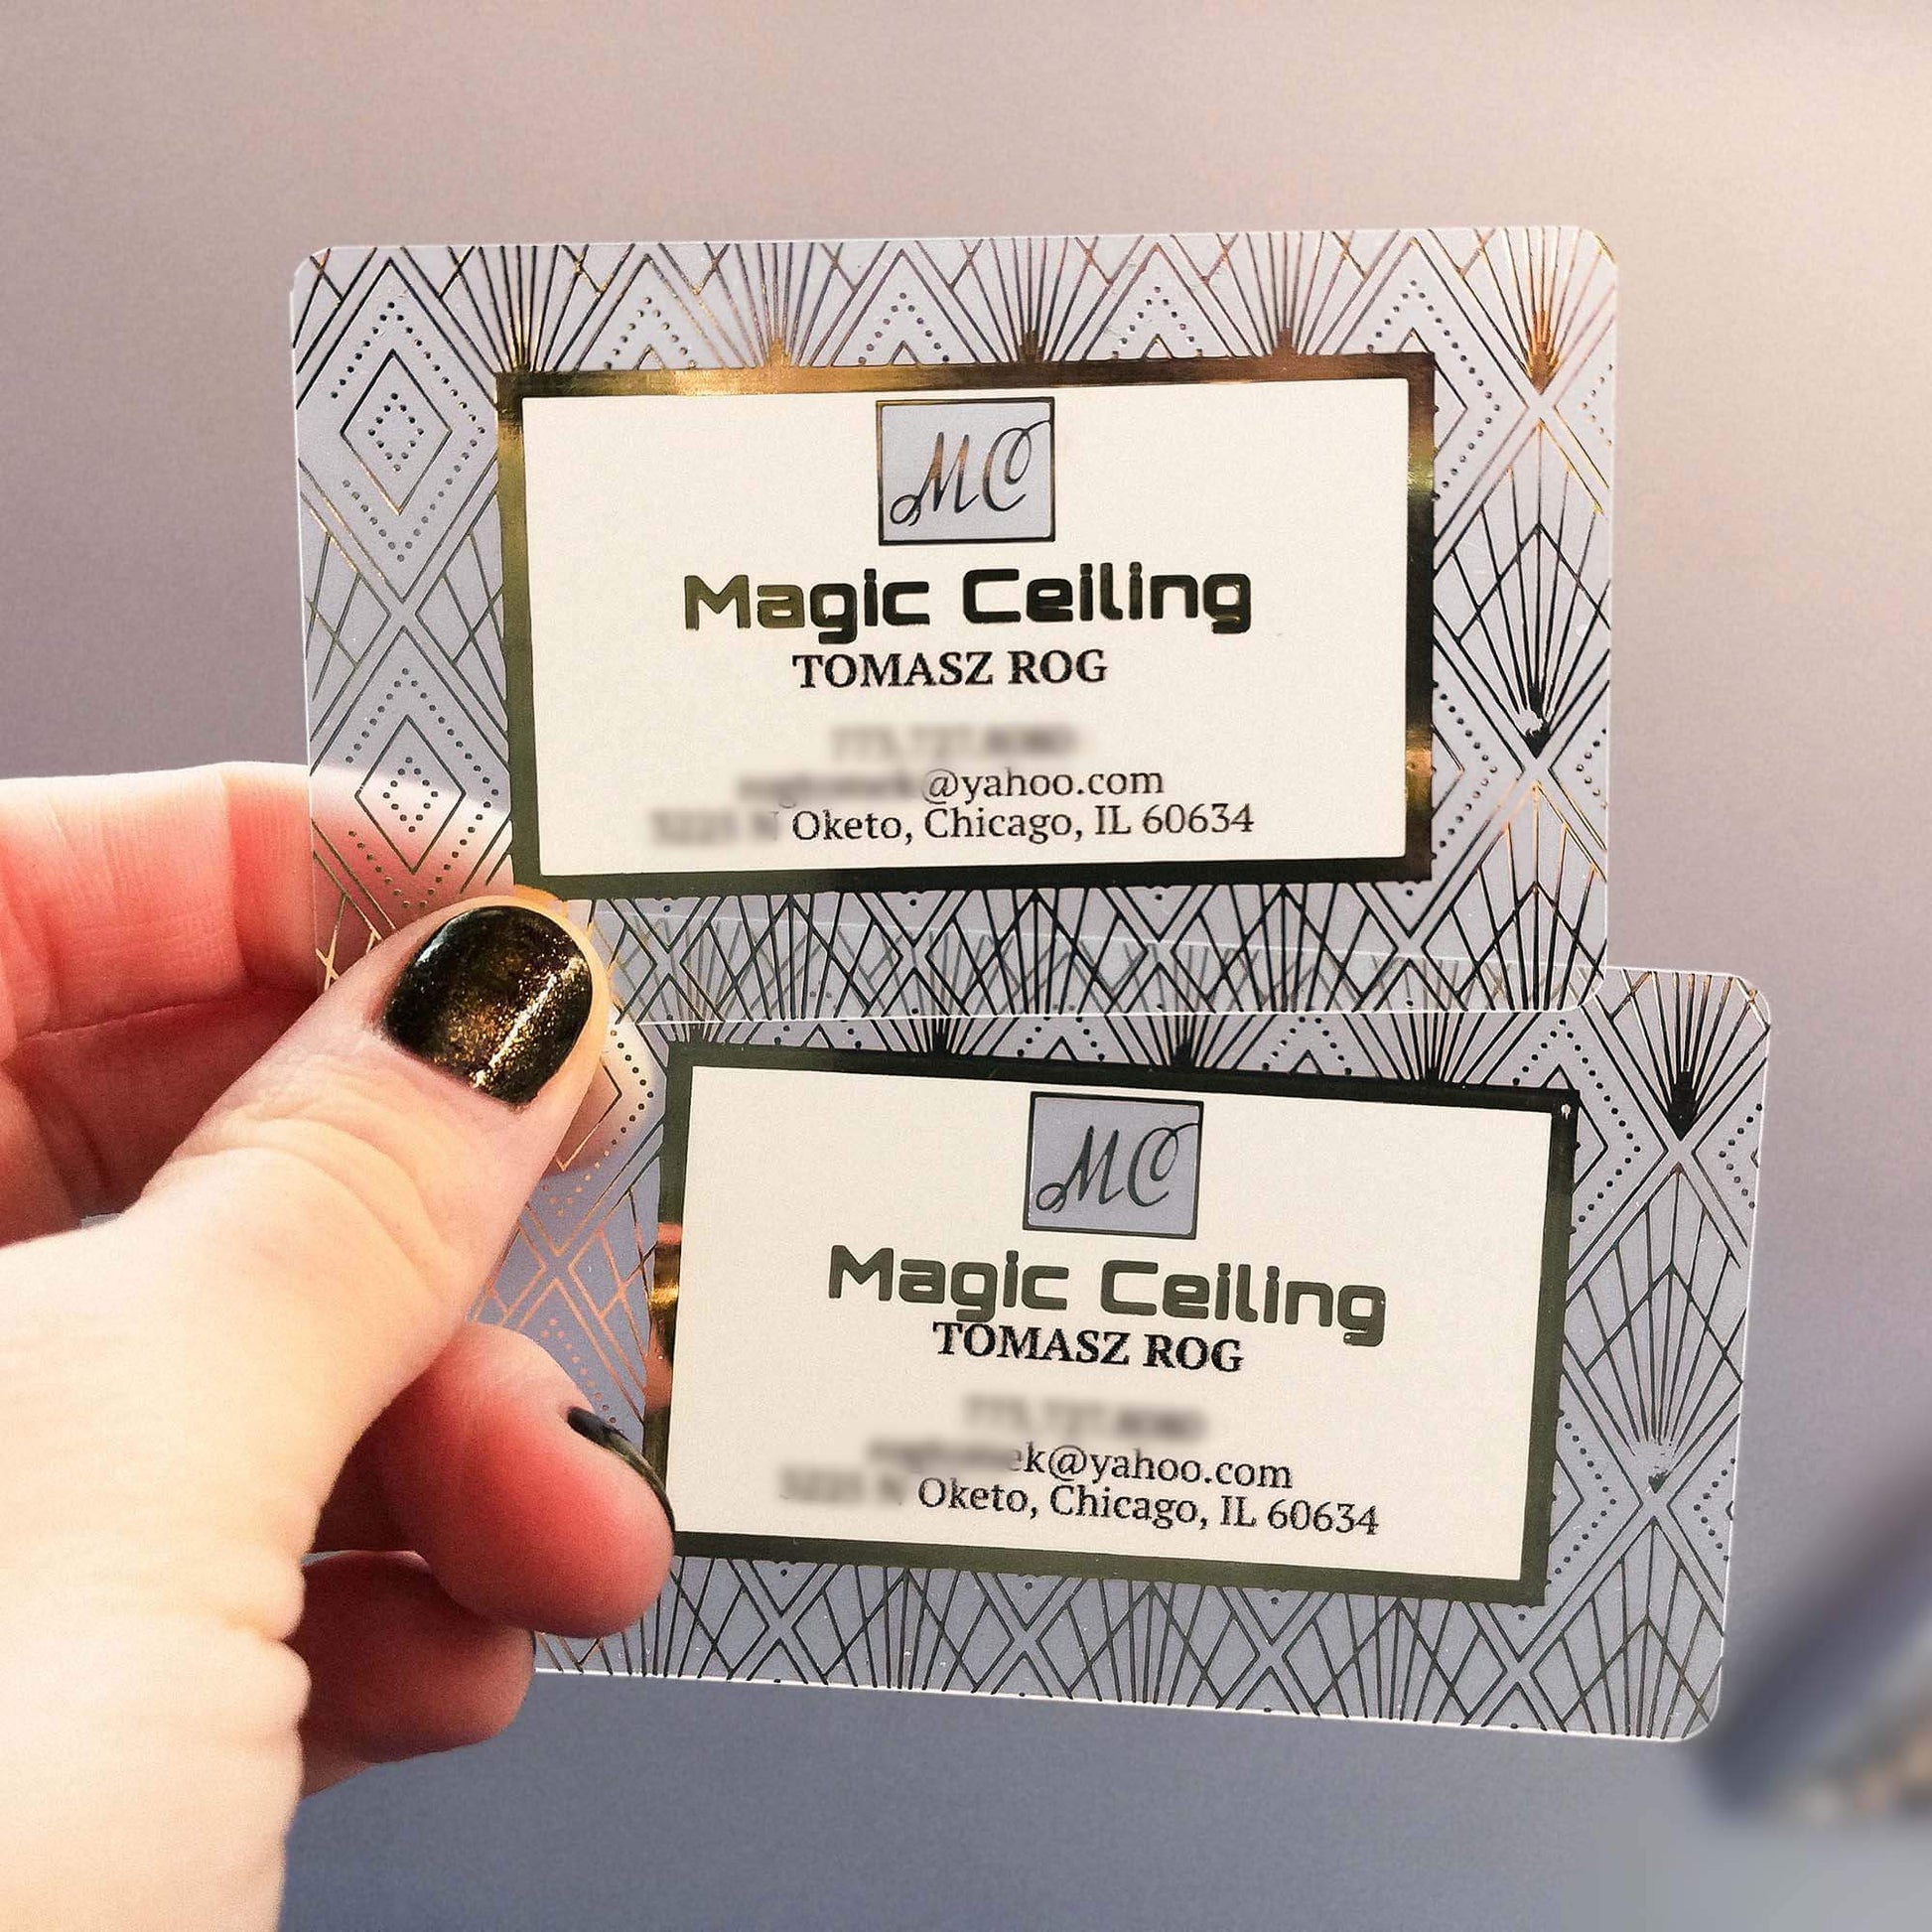 Full-color Clear Plastic Business Cards Foil Stamped BcradsCreation